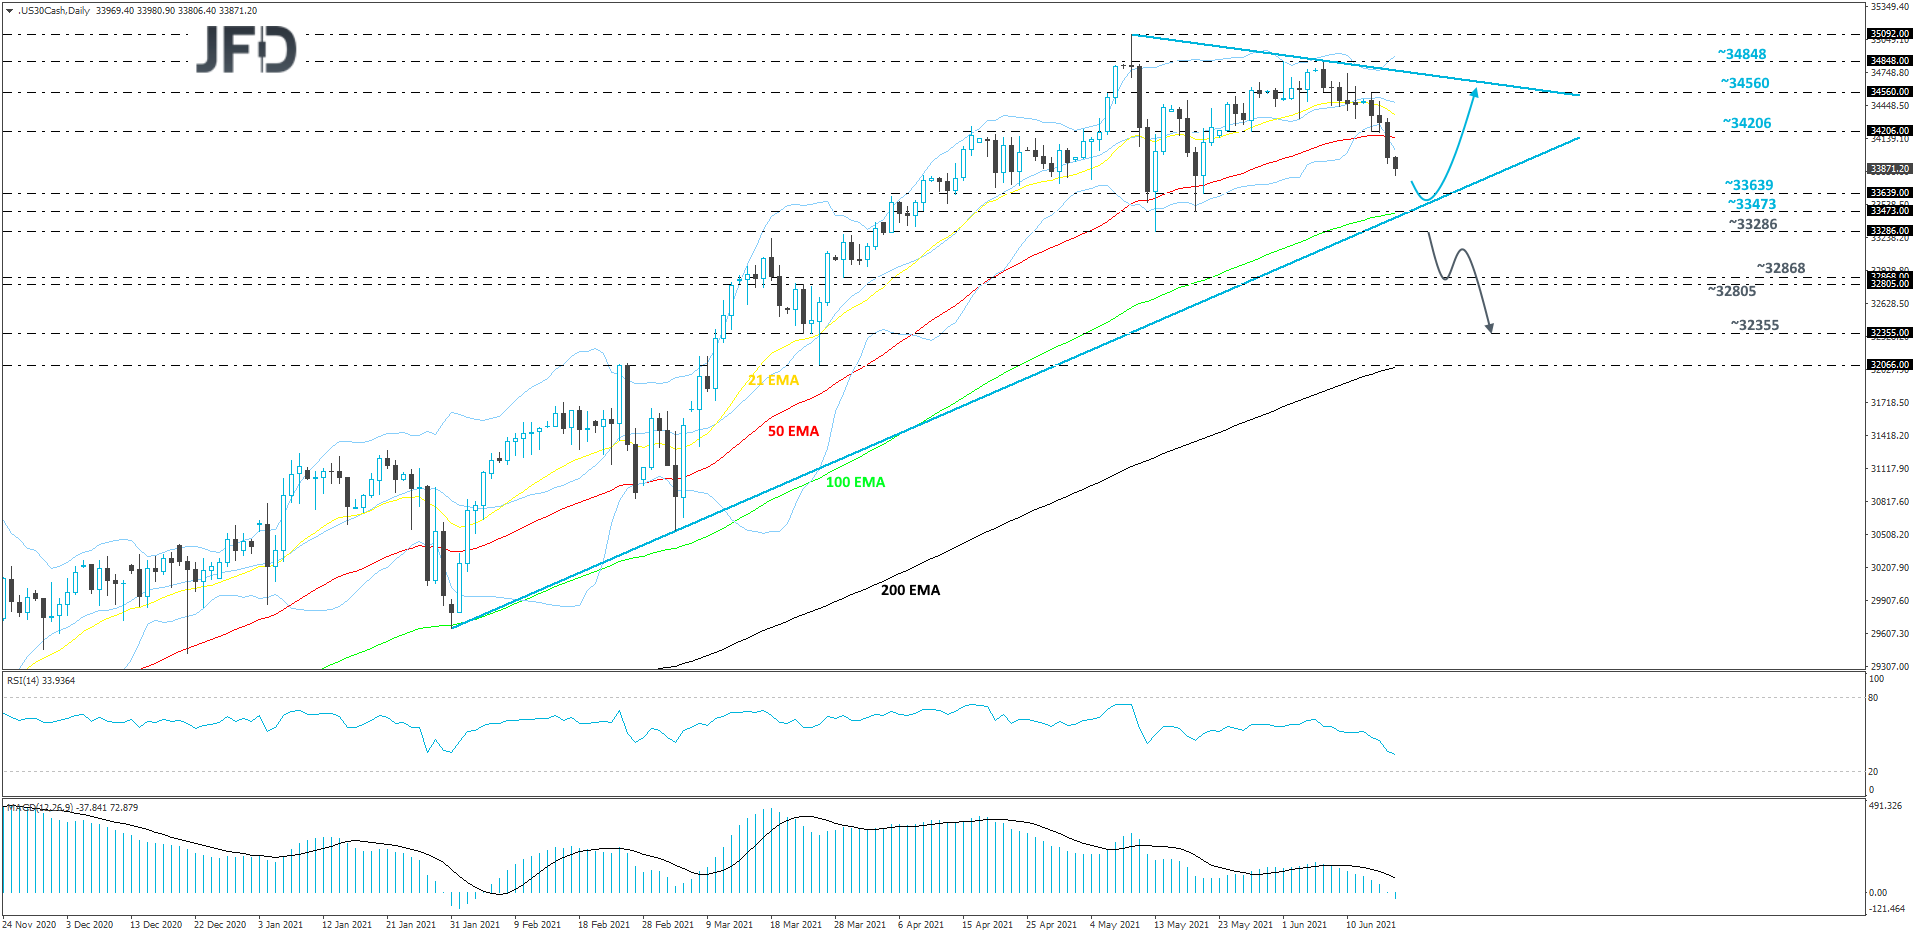 Dow Jones Industrial average daily chart technical analysis